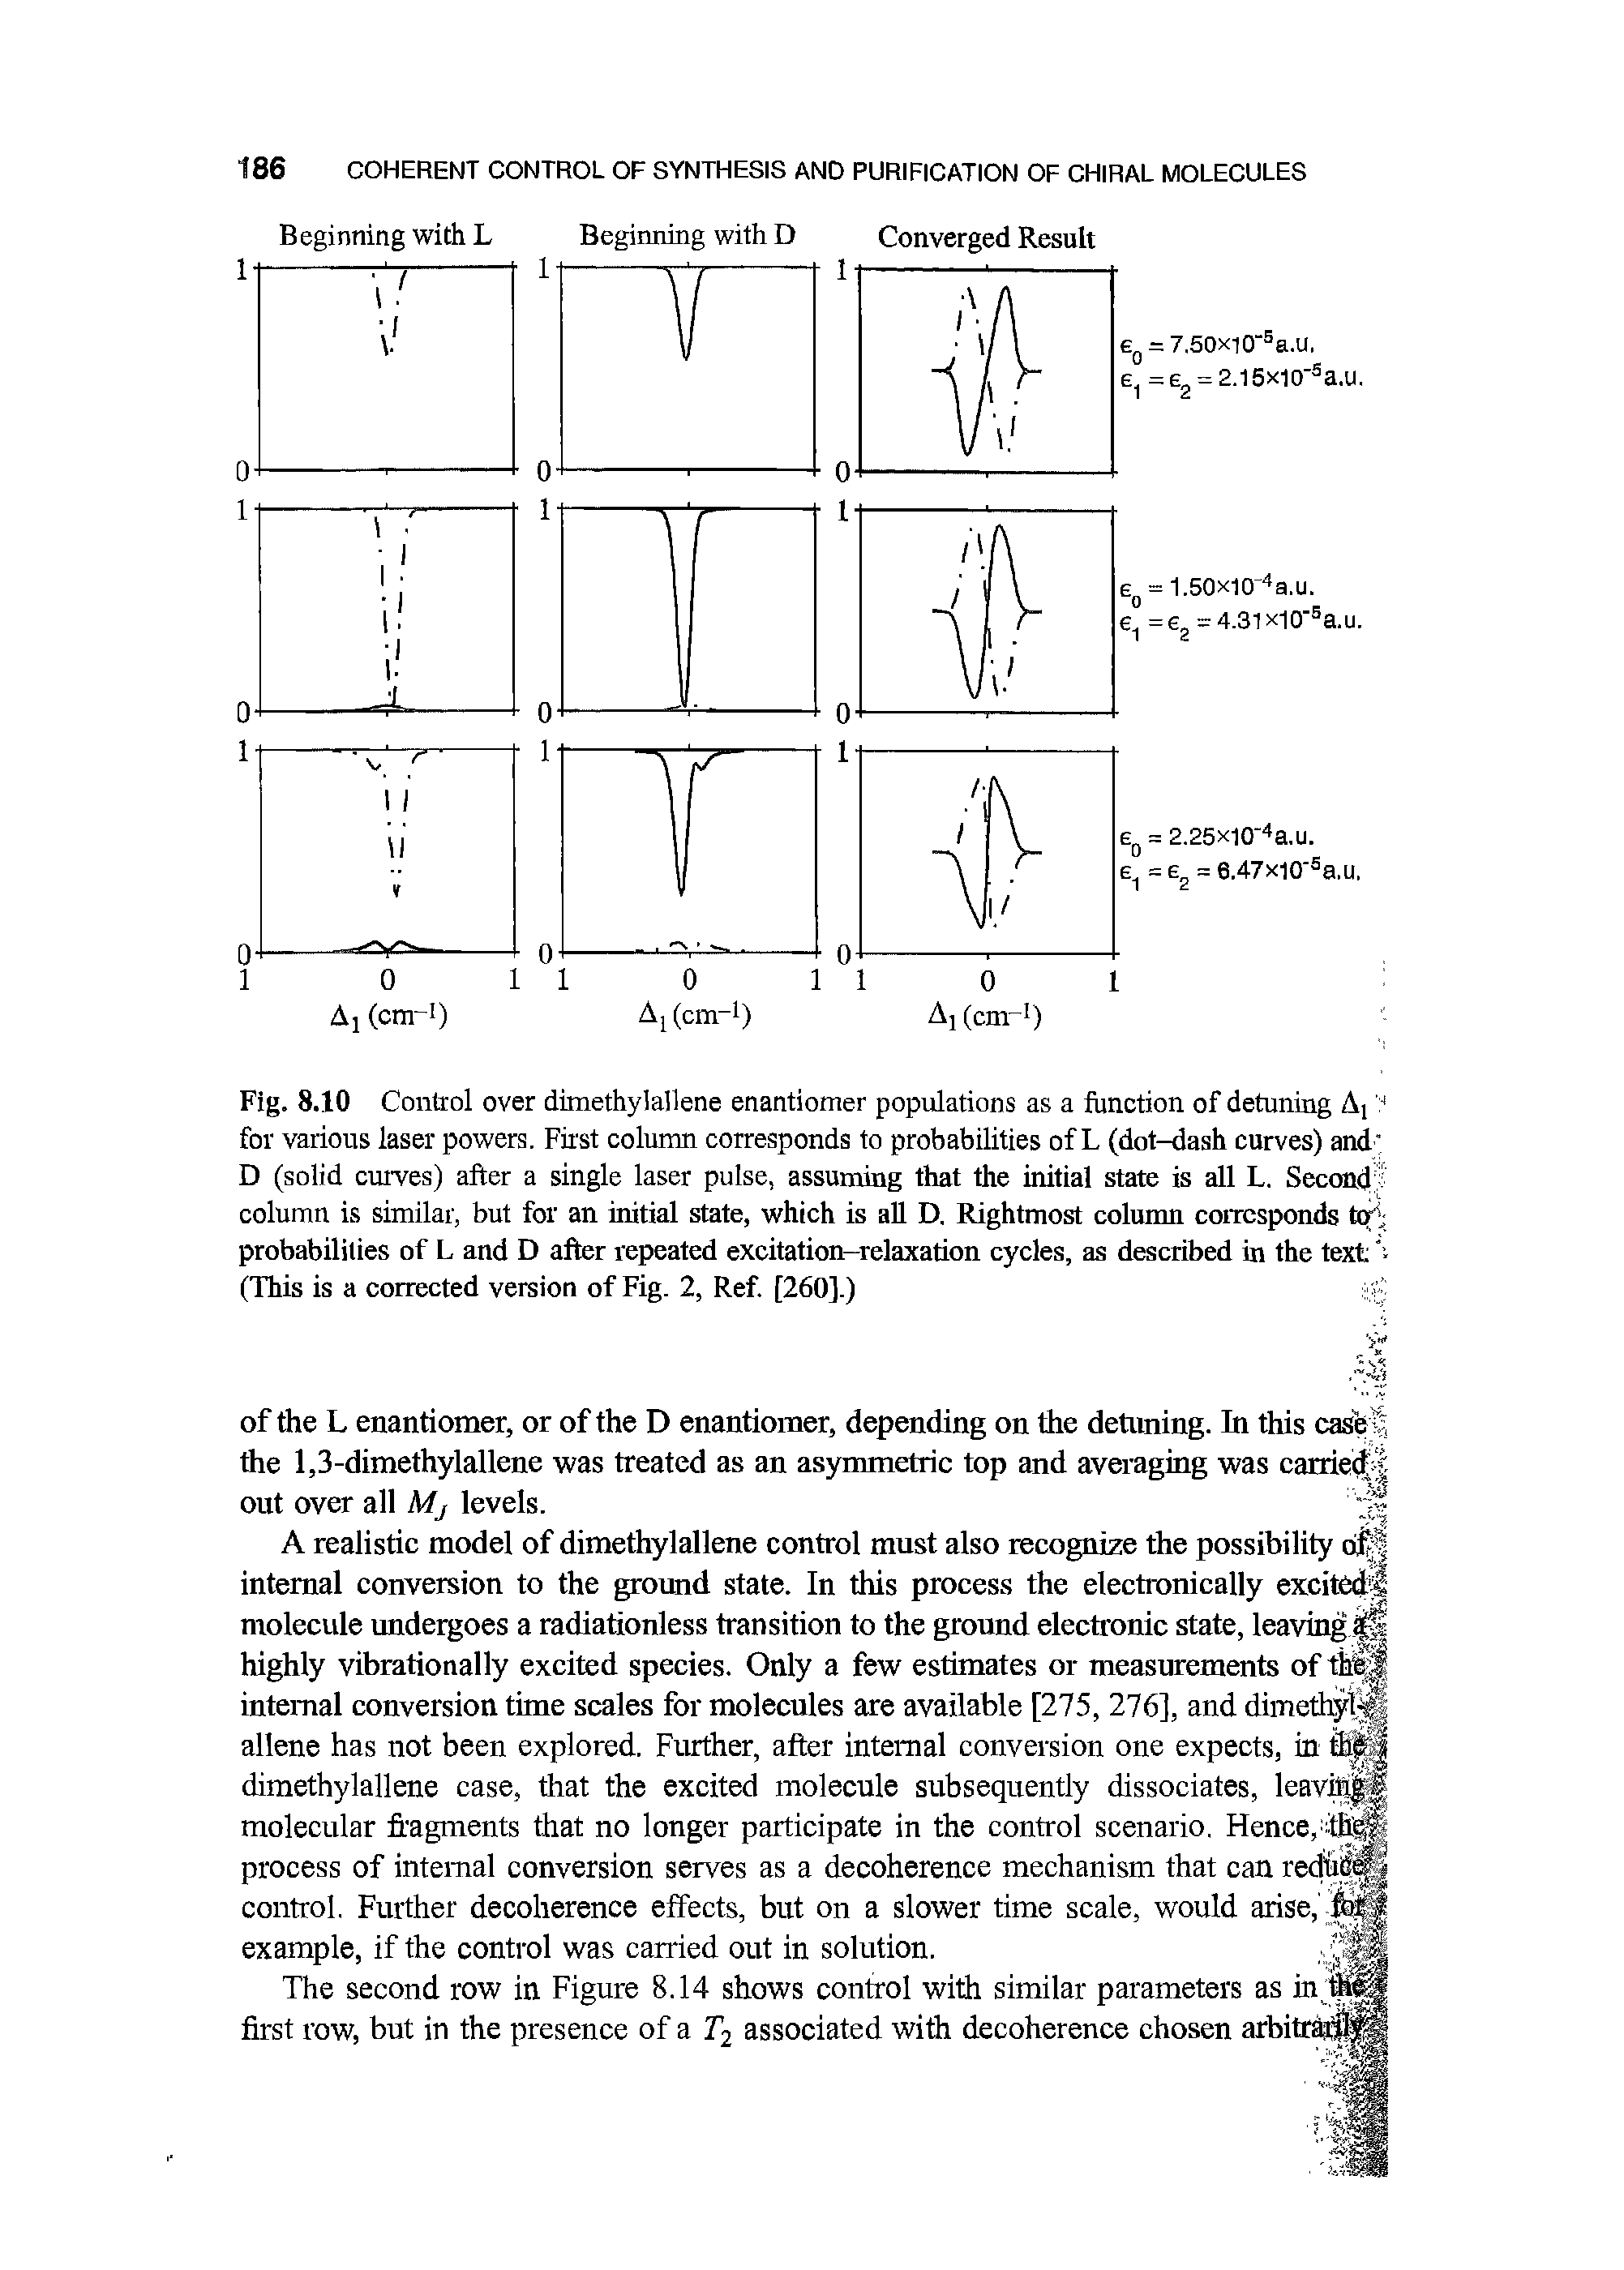 Fig. 8.10 Control over dimethylallene enantiomer populations as a function of detuning A i1 for various laser powers. First column corresponds to probabilities of L (dot-dash curves) and" D (solid curves) after a single laser pulse, assuming that the initial state is all L. Second column is similar, but for an initial state, which is all D. Rightmost column corresponds toy probabilities of L and D after repeated excitation-relaxation cycles, as described in the text (This is a corrected version of Fig. 2, Ref. [260].) i g...